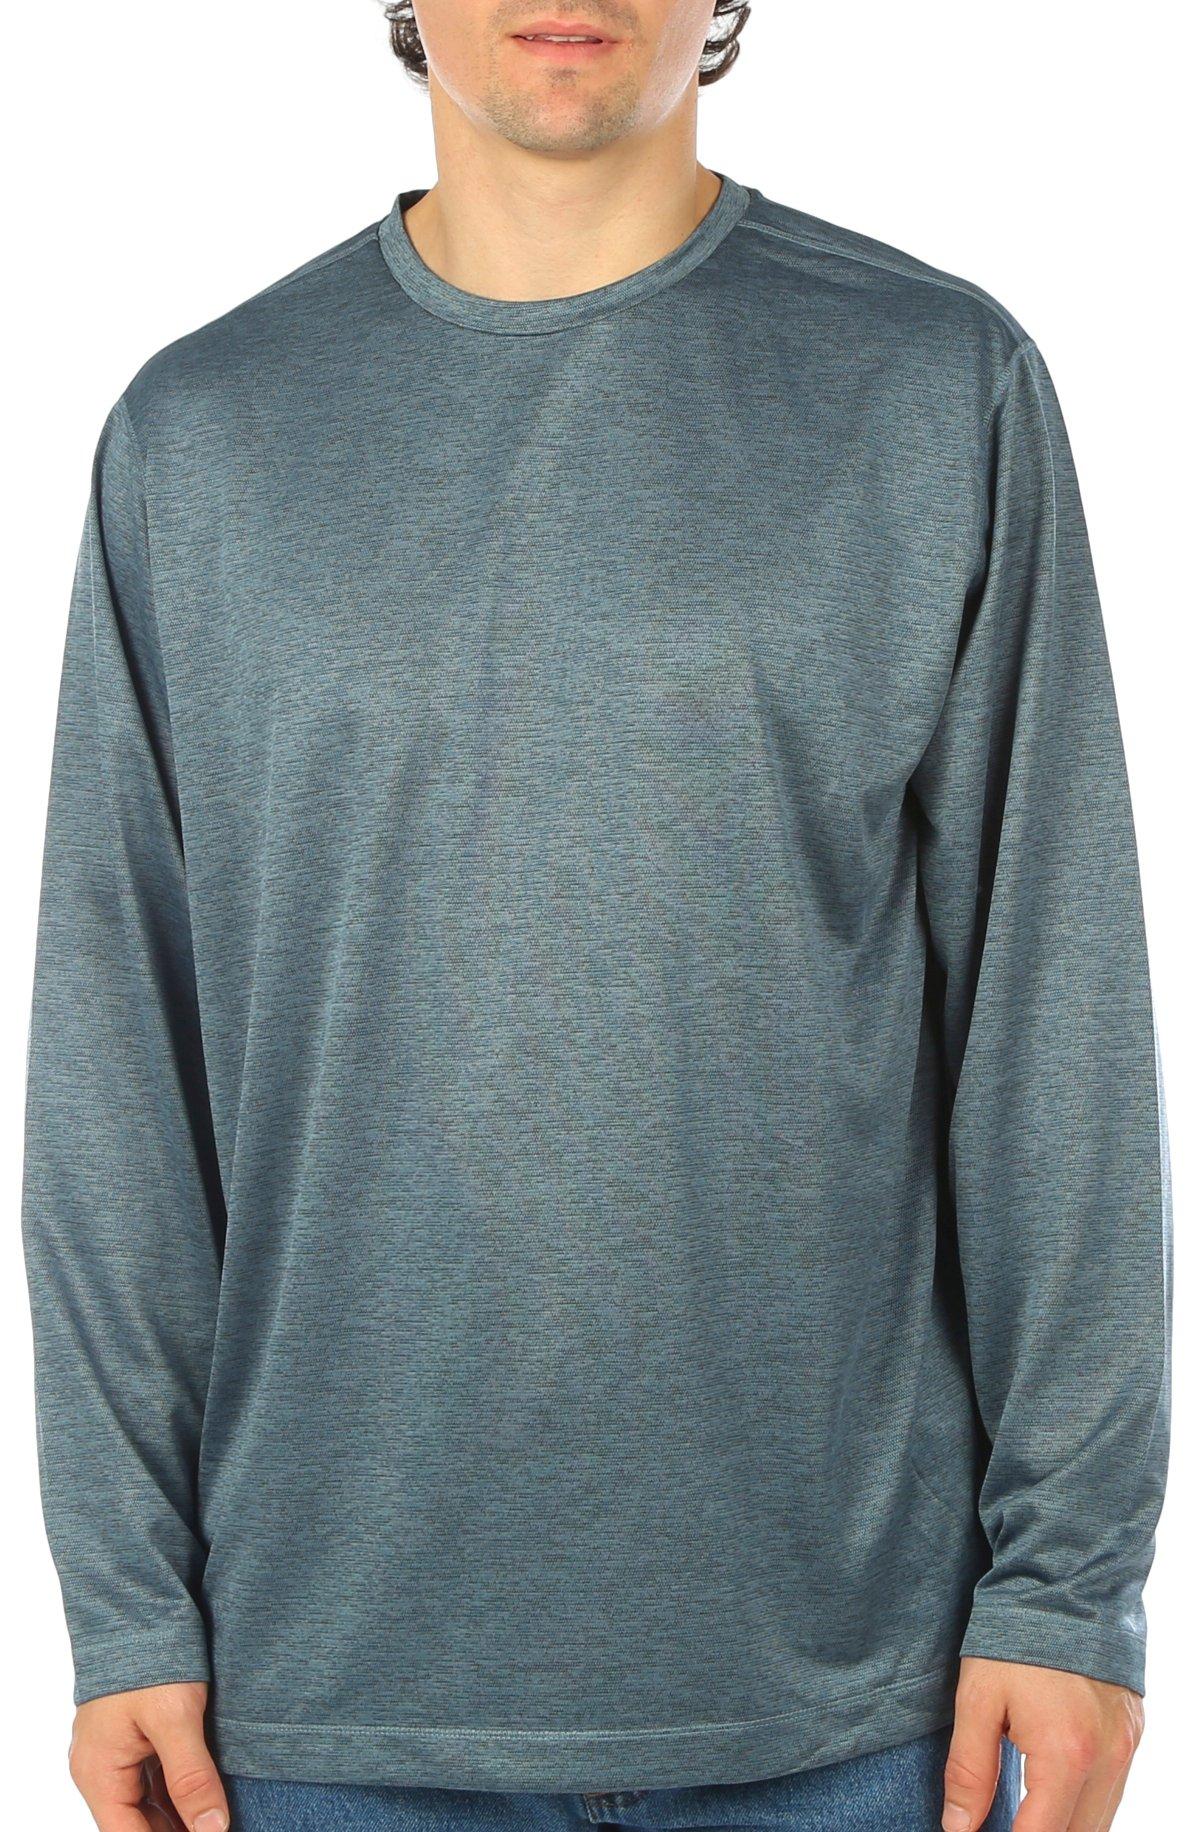 RB3 Active Mens Performance Long Sleeve Top